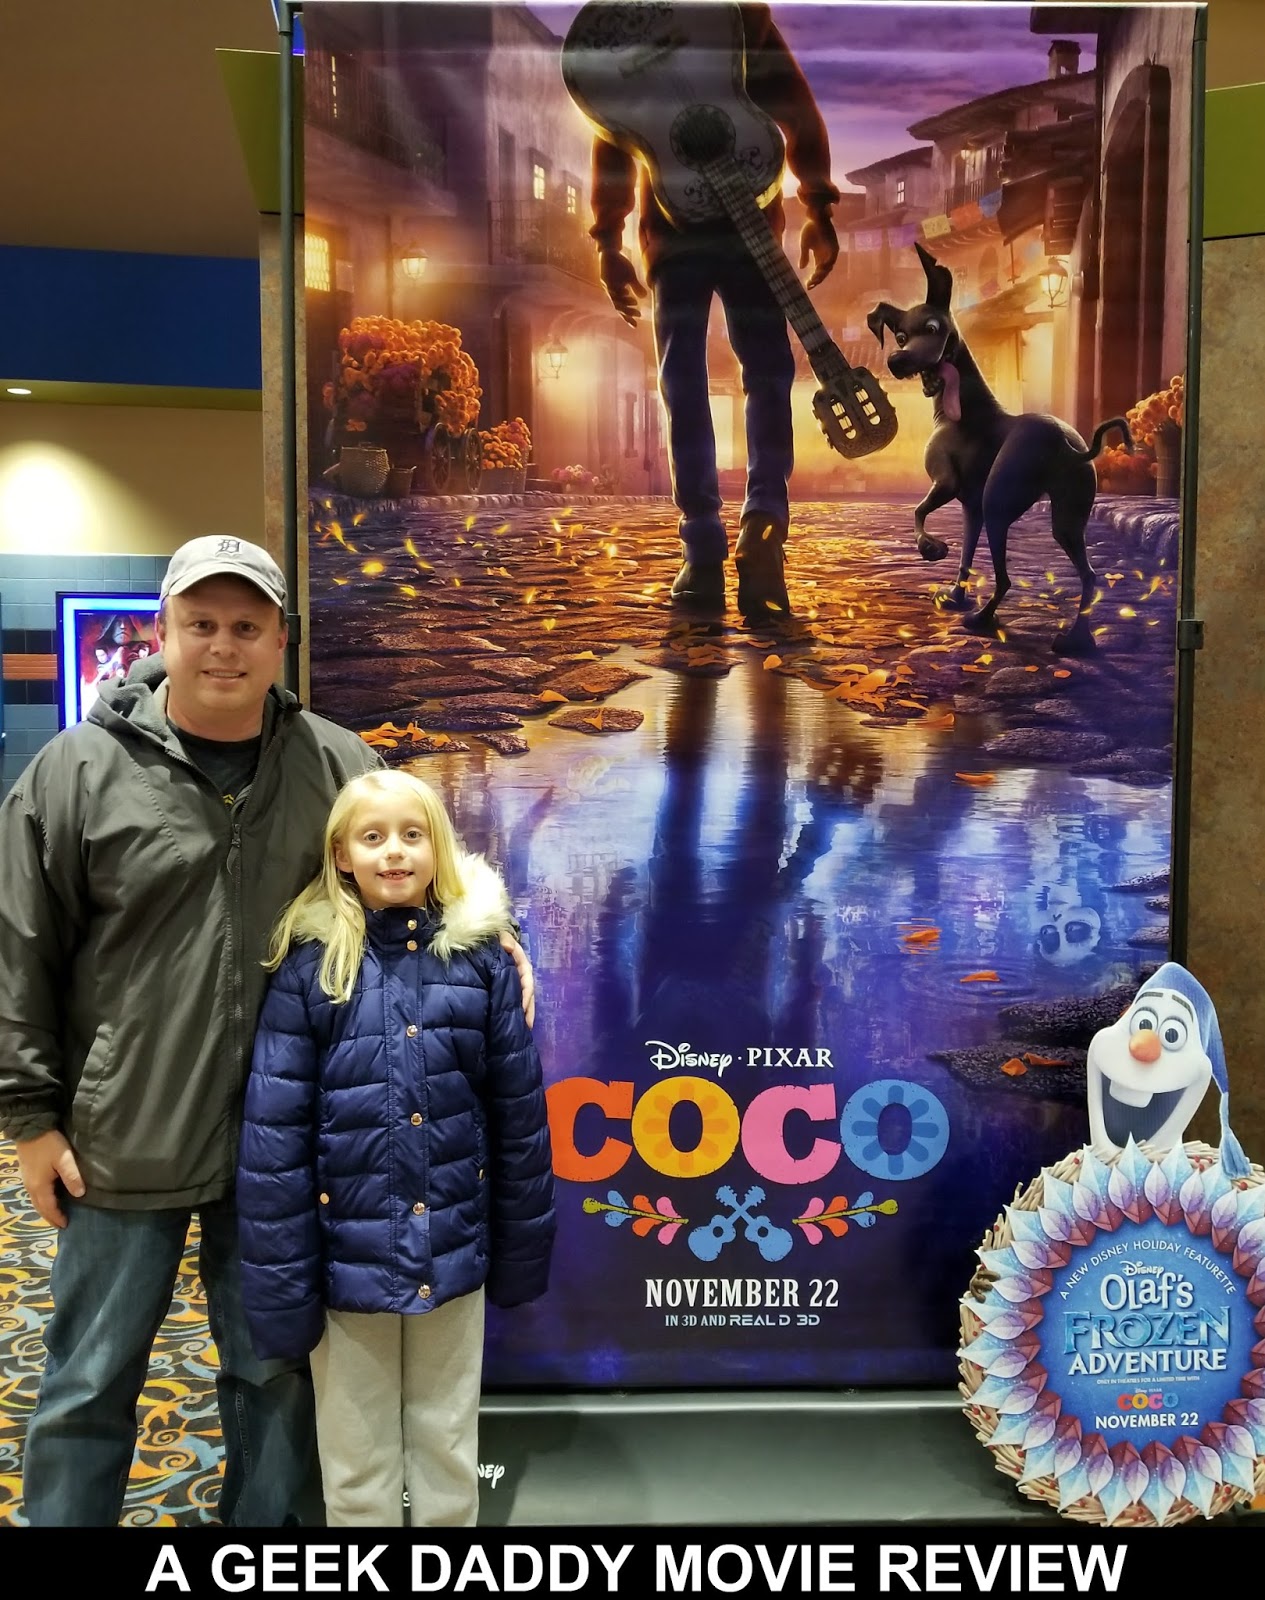 A GEEK DADDY: COCO MOVIE REVIEW